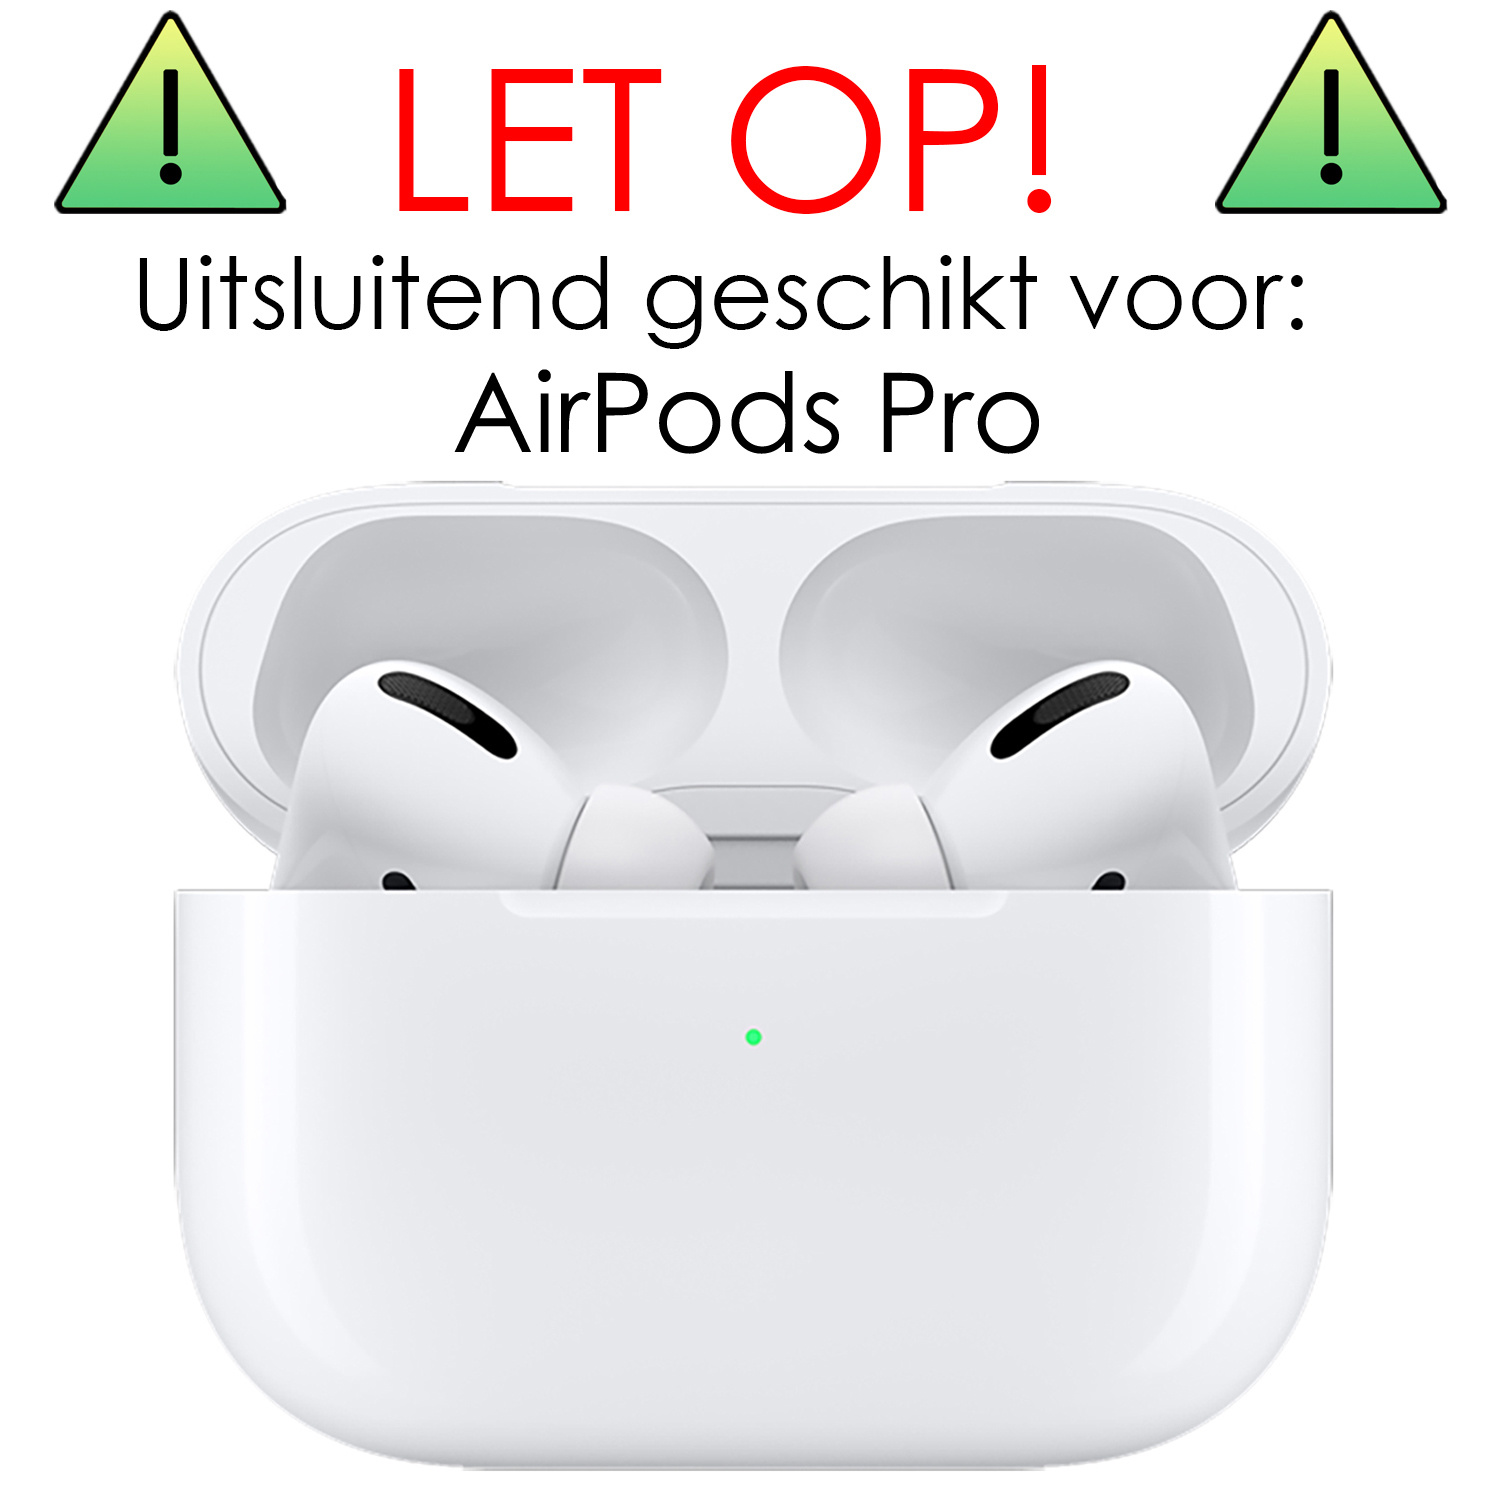 NoXx Hoes Geschikt voor Airpods Pro Hoesje Cover Silicone Case Hoes - Lila - 2x